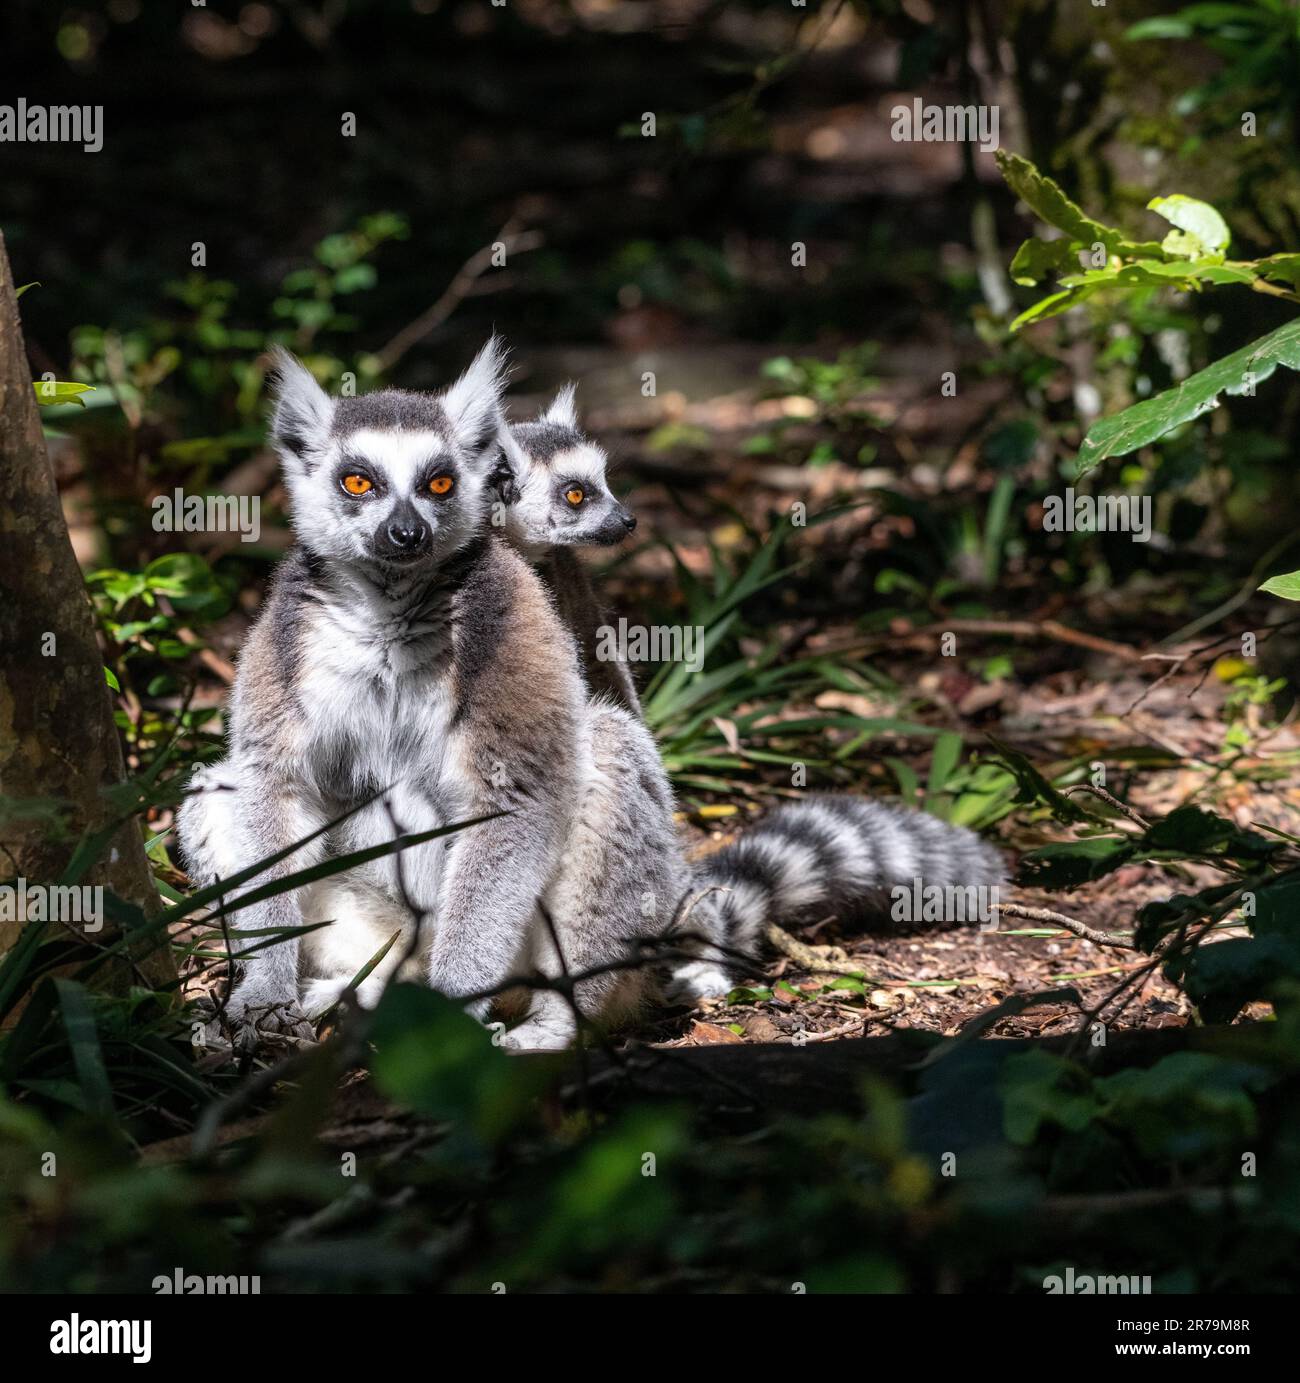 An adorable lemur perched on the ground surveys its surroundings with a curious gaze Stock Photo